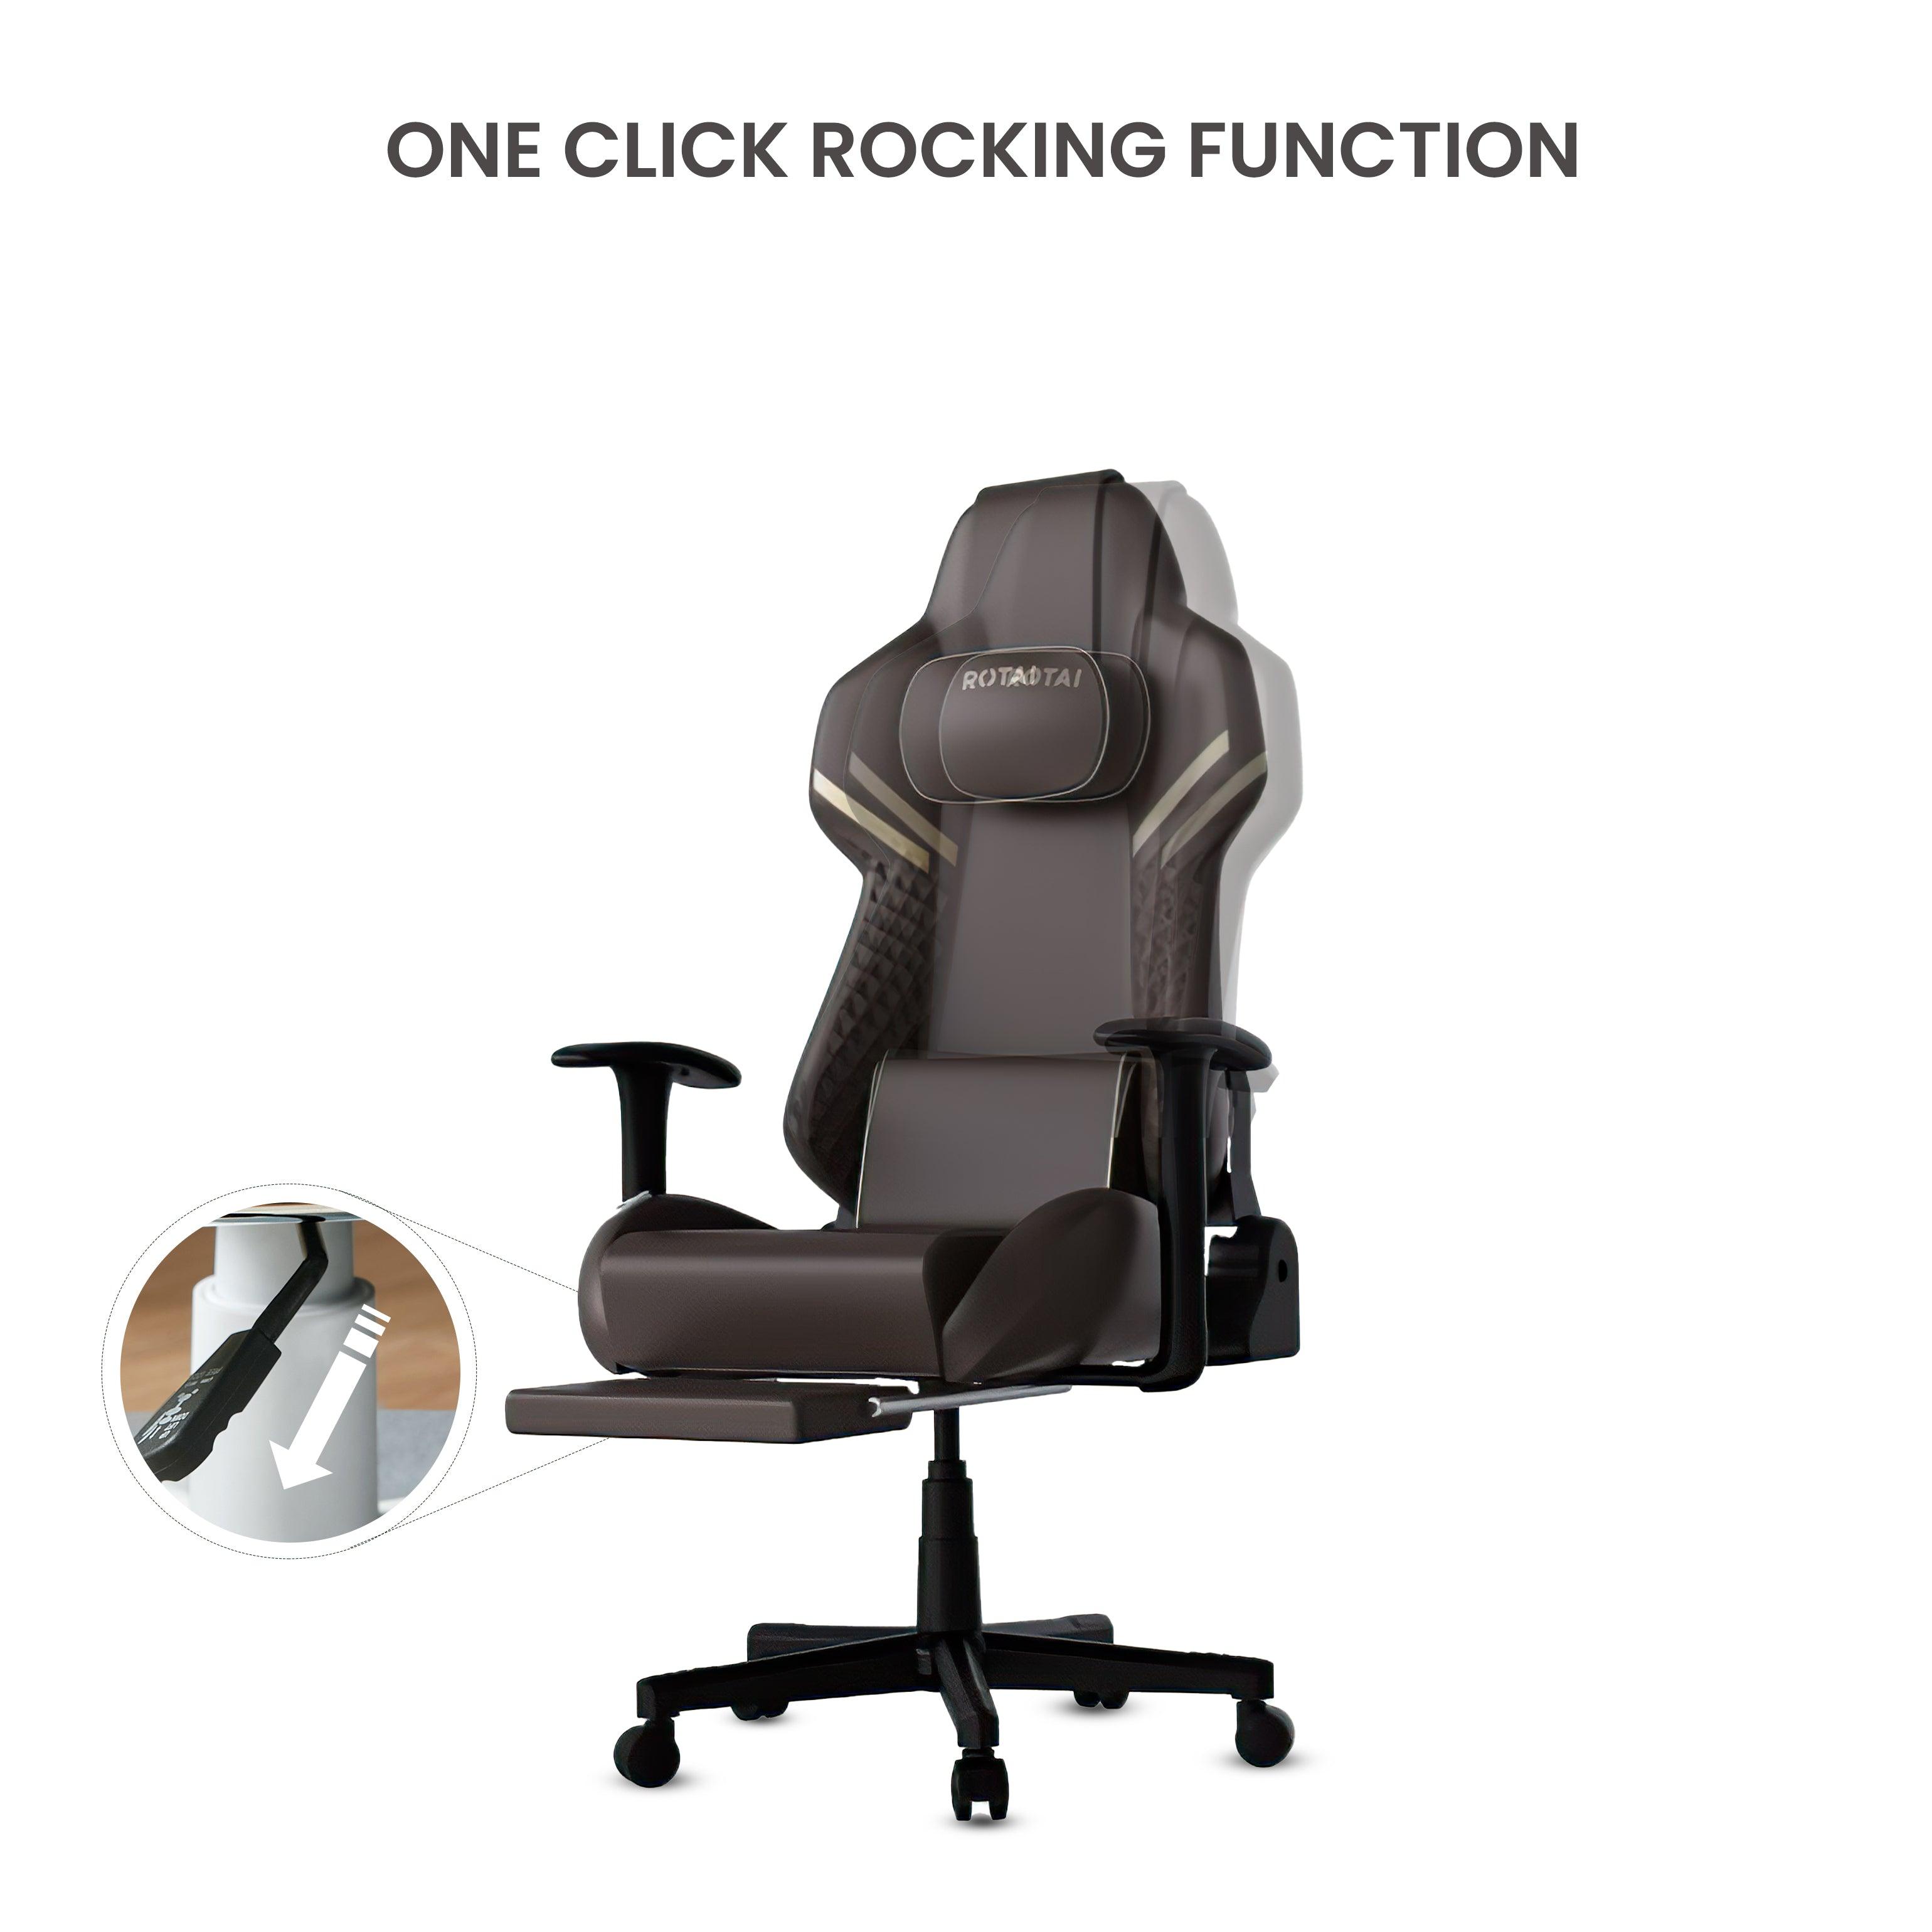 Brown office massage chair model E16 featuring one-click rocking function. Best massage chair in UAE, Dubai massage chair shop.